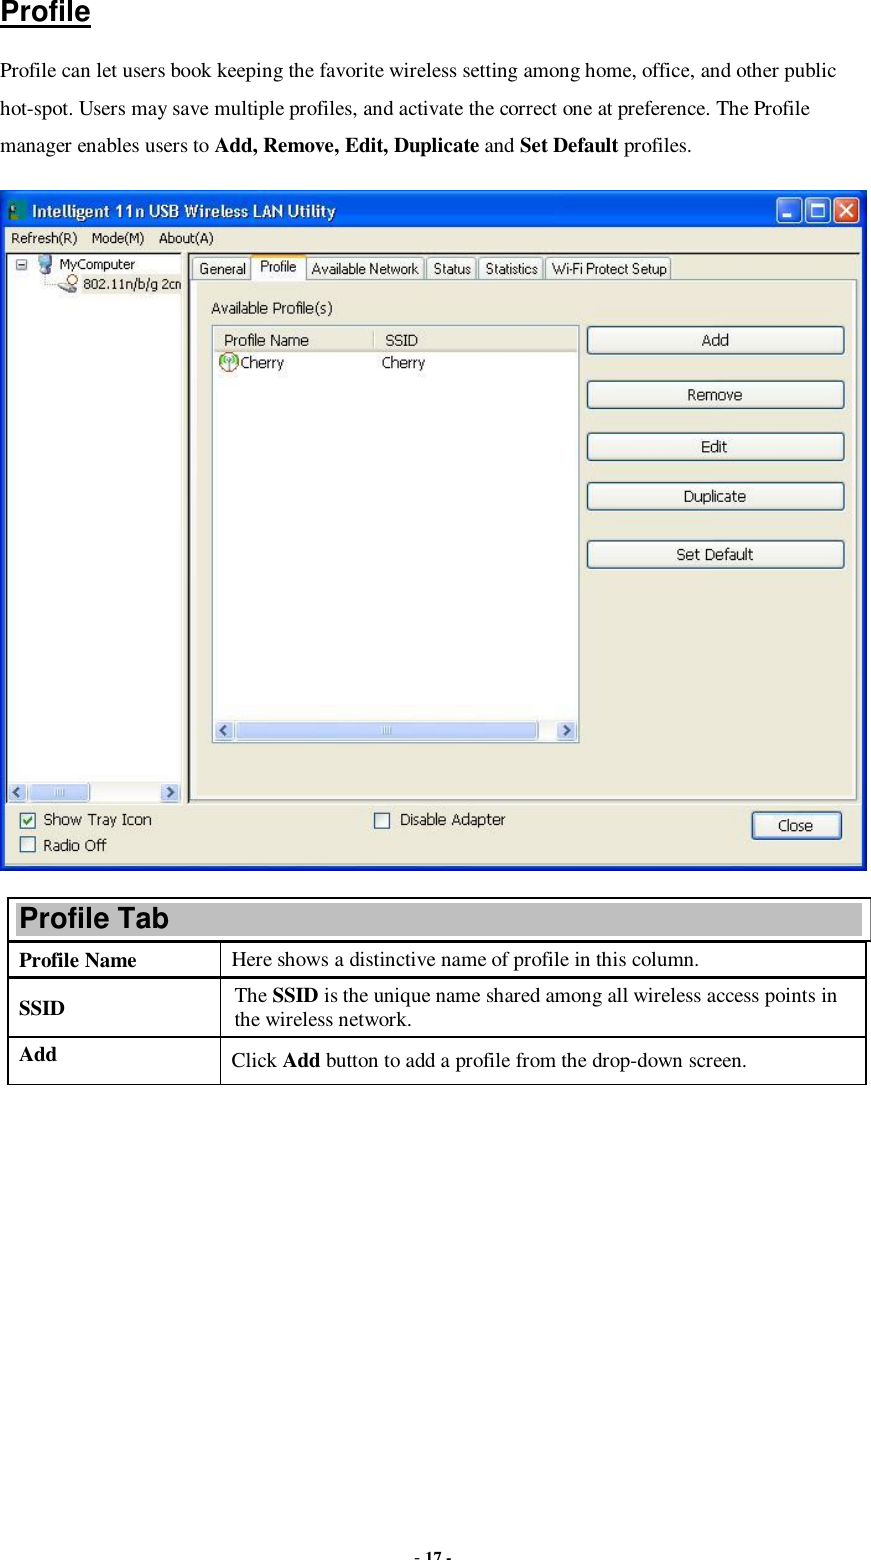  - 17 - Profile Profile can let users book keeping the favorite wireless setting among home, office, and other public hot-spot. Users may save multiple profiles, and activate the correct one at preference. The Profile manager enables users to Add, Remove, Edit, Duplicate and Set Default profiles.  Profile Tab Profile Name  Here shows a distinctive name of profile in this column. SSID  The SSID is the unique name shared among all wireless access points in the wireless network. Add  Click Add button to add a profile from the drop-down screen. 